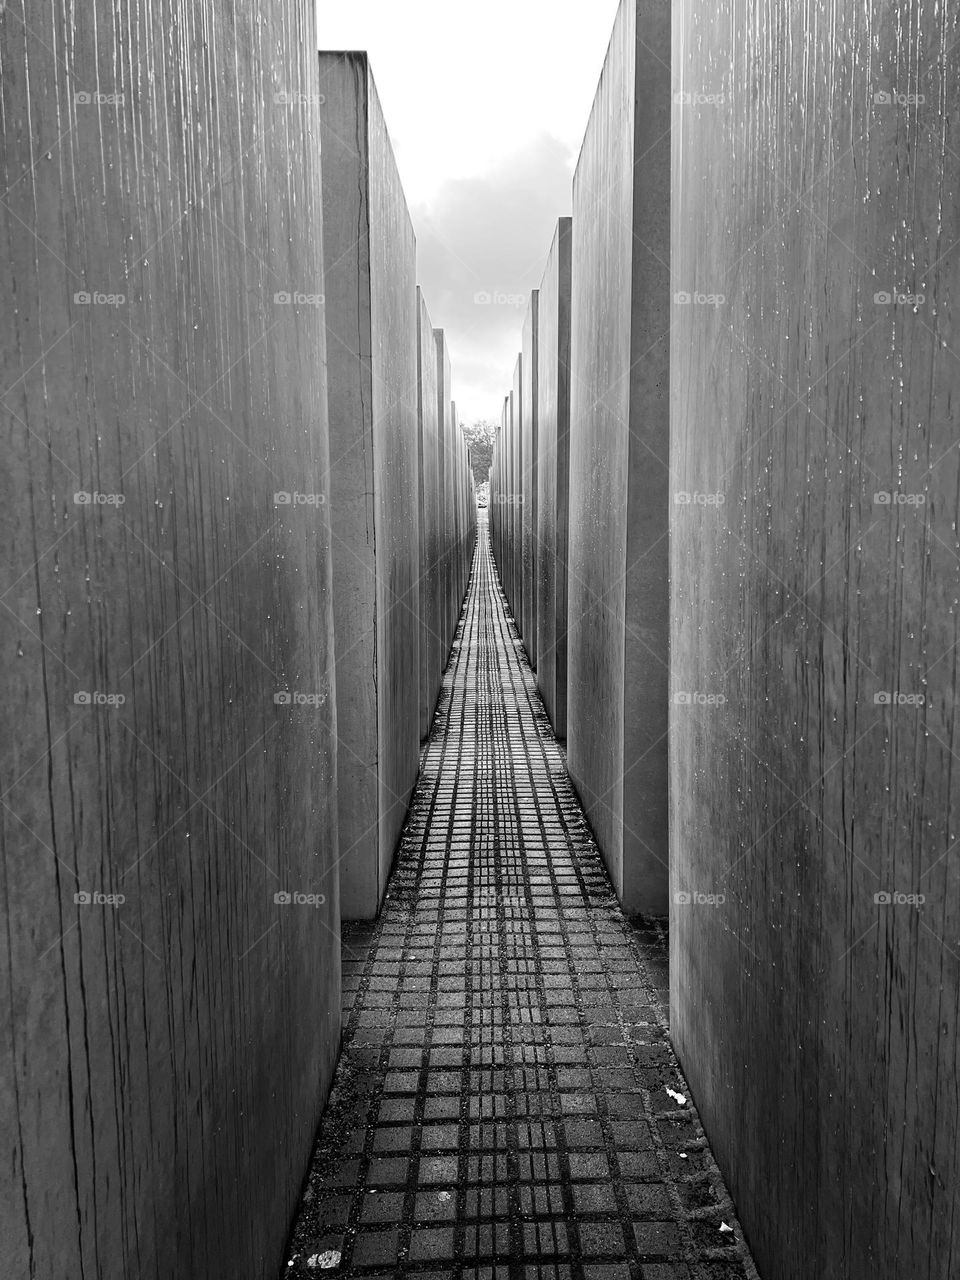 Monument to the murdered jews